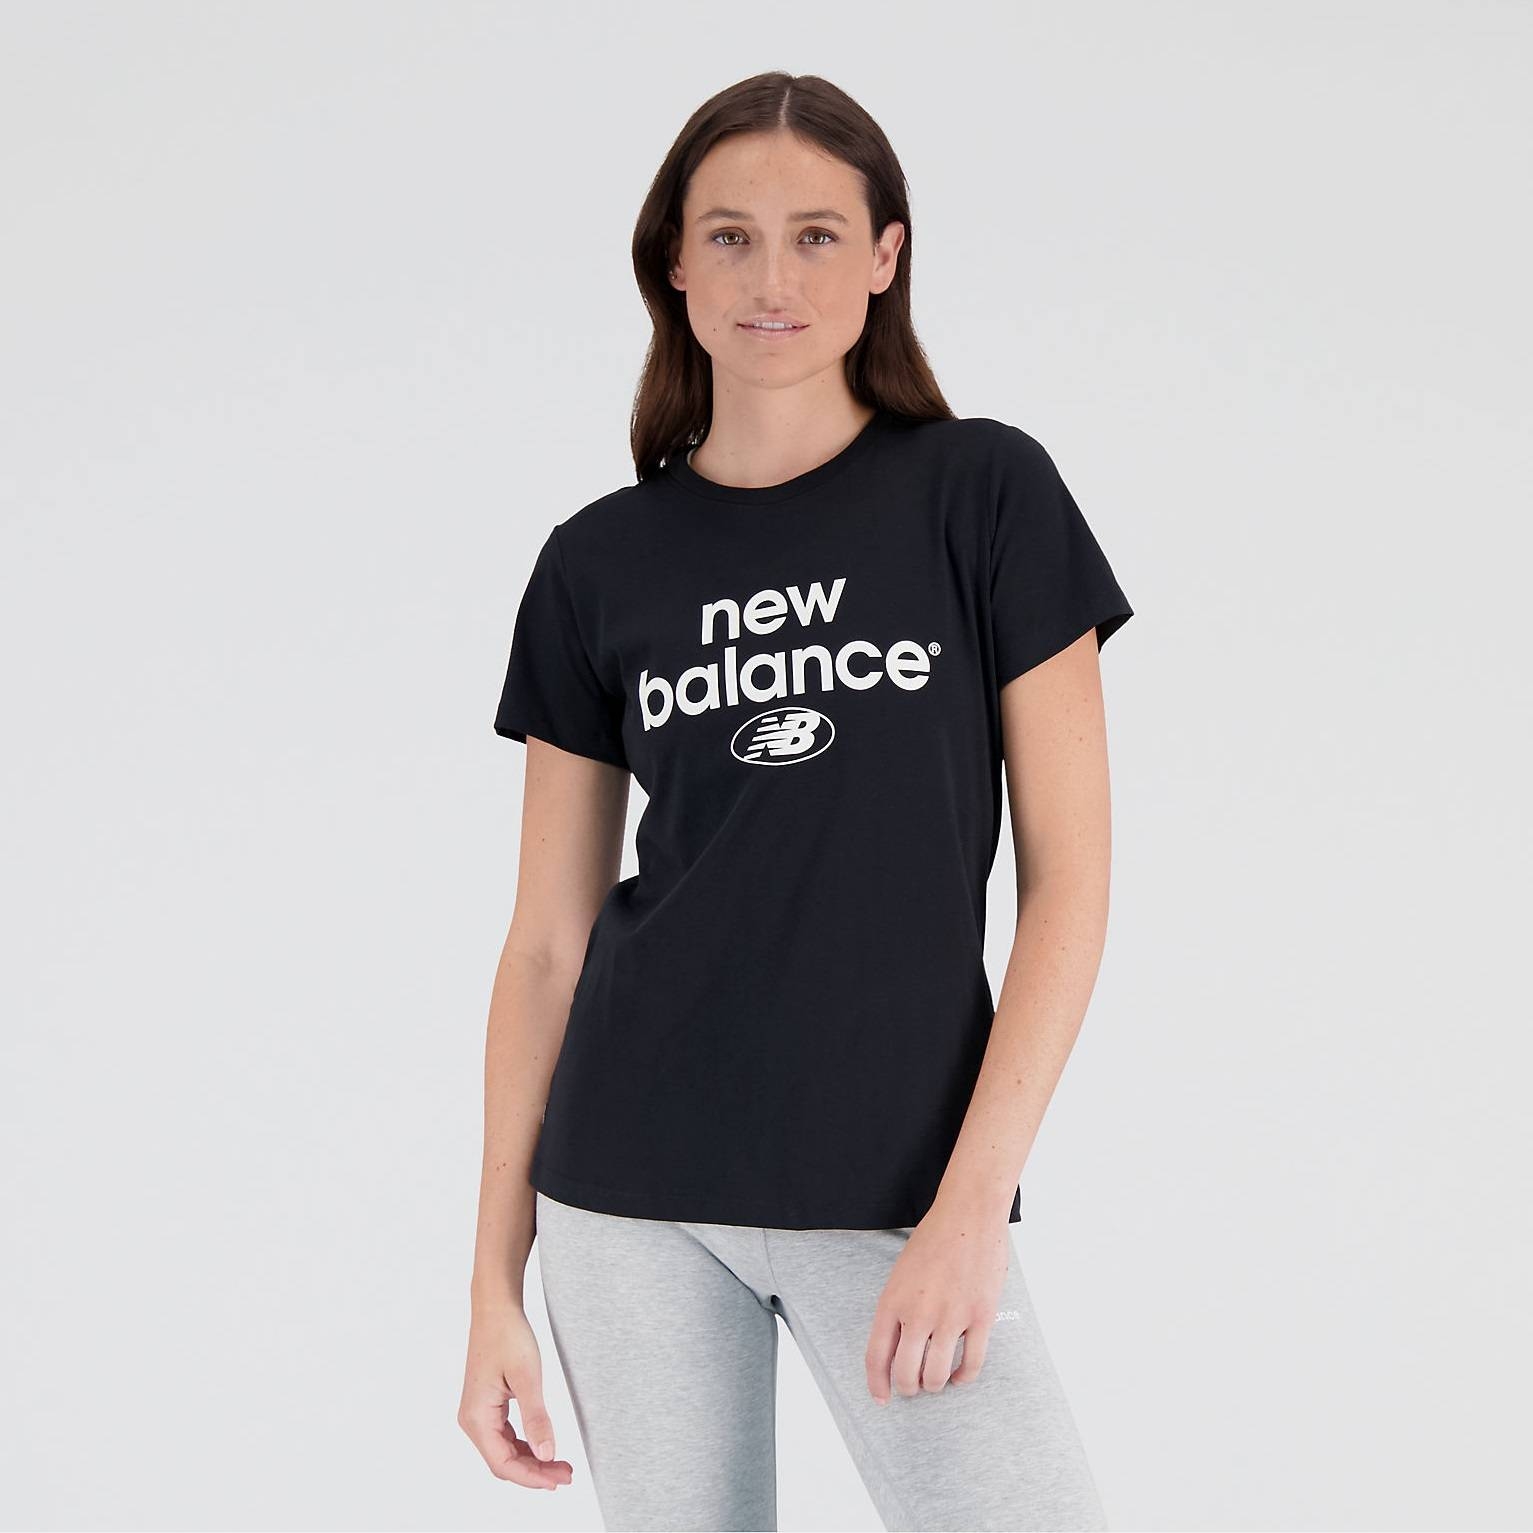 NEW BALANCE ESSENTIALS REIMAGINED ARCHIVE COTTON JERSEY ATHLETIC FIT T-SHIRT